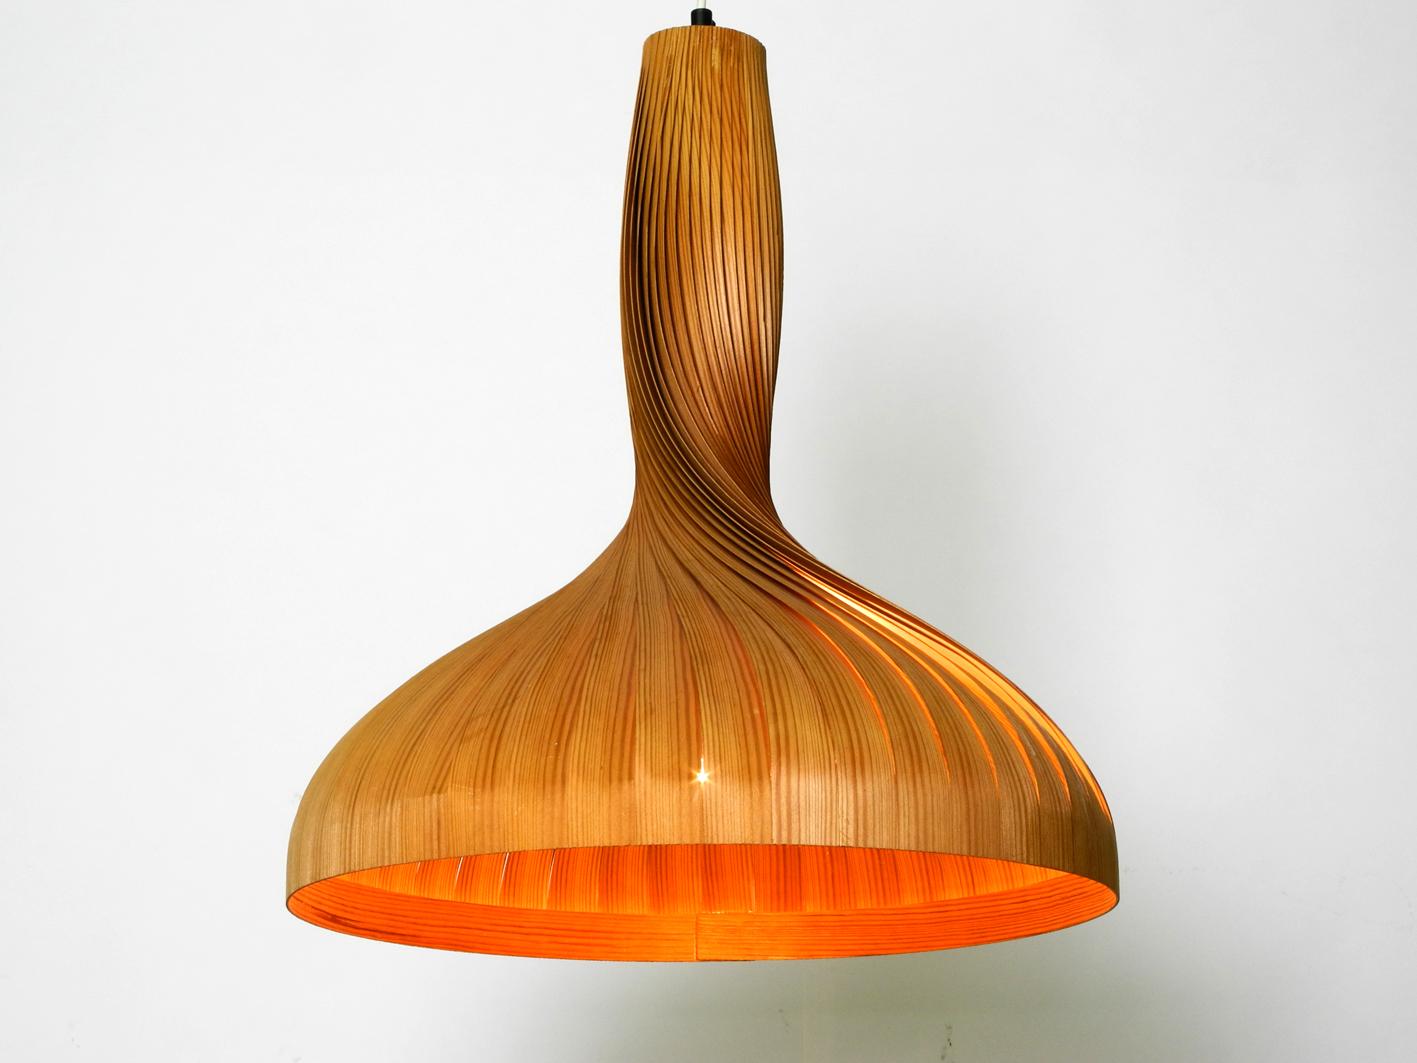 Elegant large Hans Agne Jakobsson pendant light for Markaryd, Sweden. Made of wood stripes twisted and bent into a very nice shape. An original from the 1960s in very good condition. Very elegant great design and popular classic. 100% original